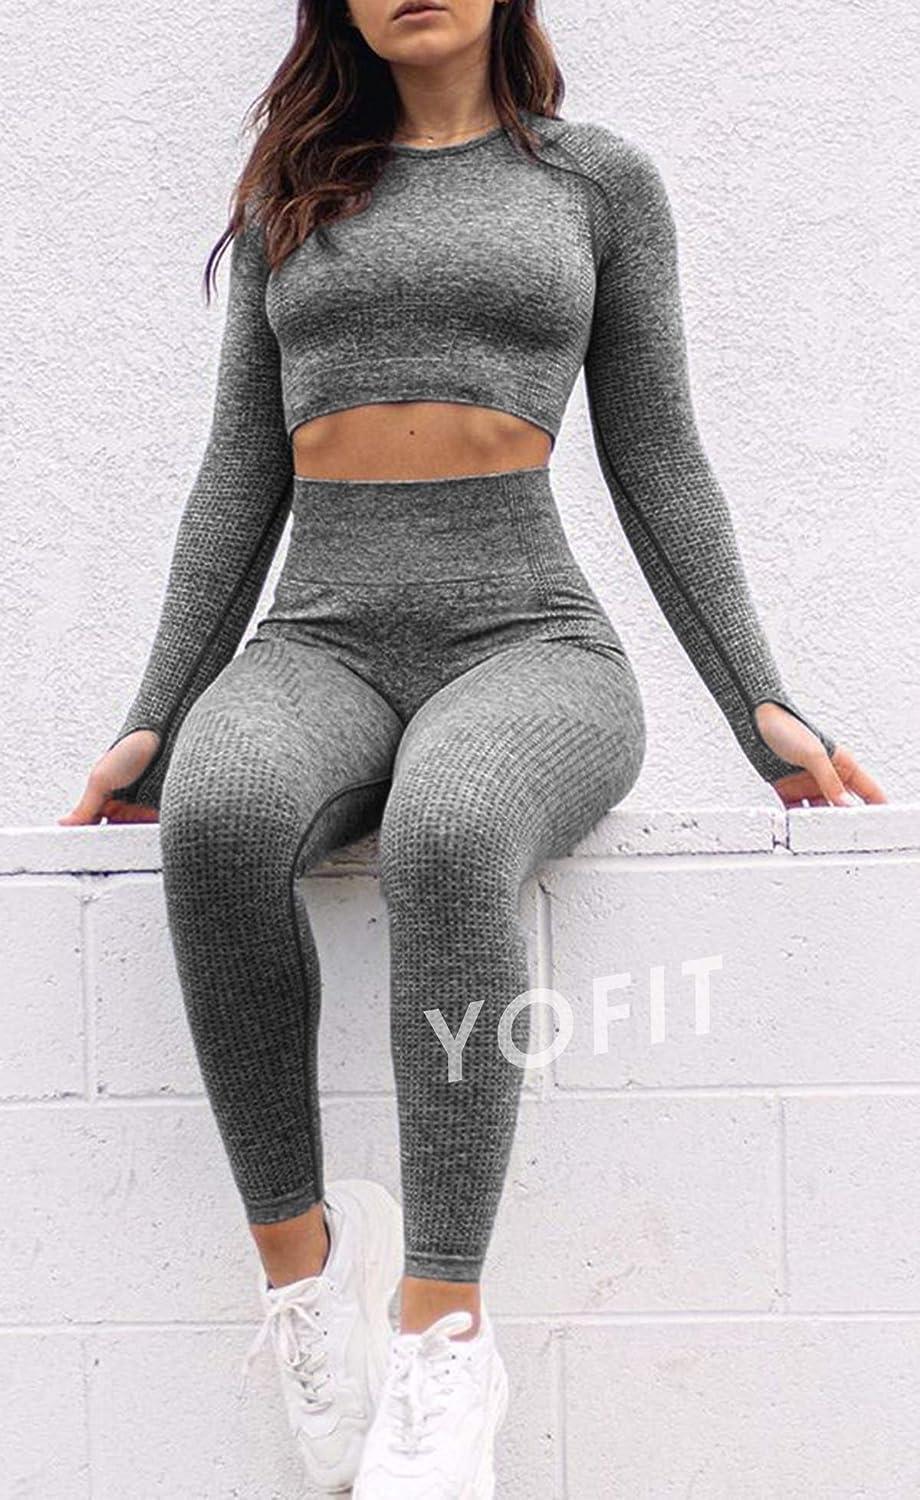 Long Sleeve Yoga Gym Clothes Crop Top Women – A Body Fit For A Lord